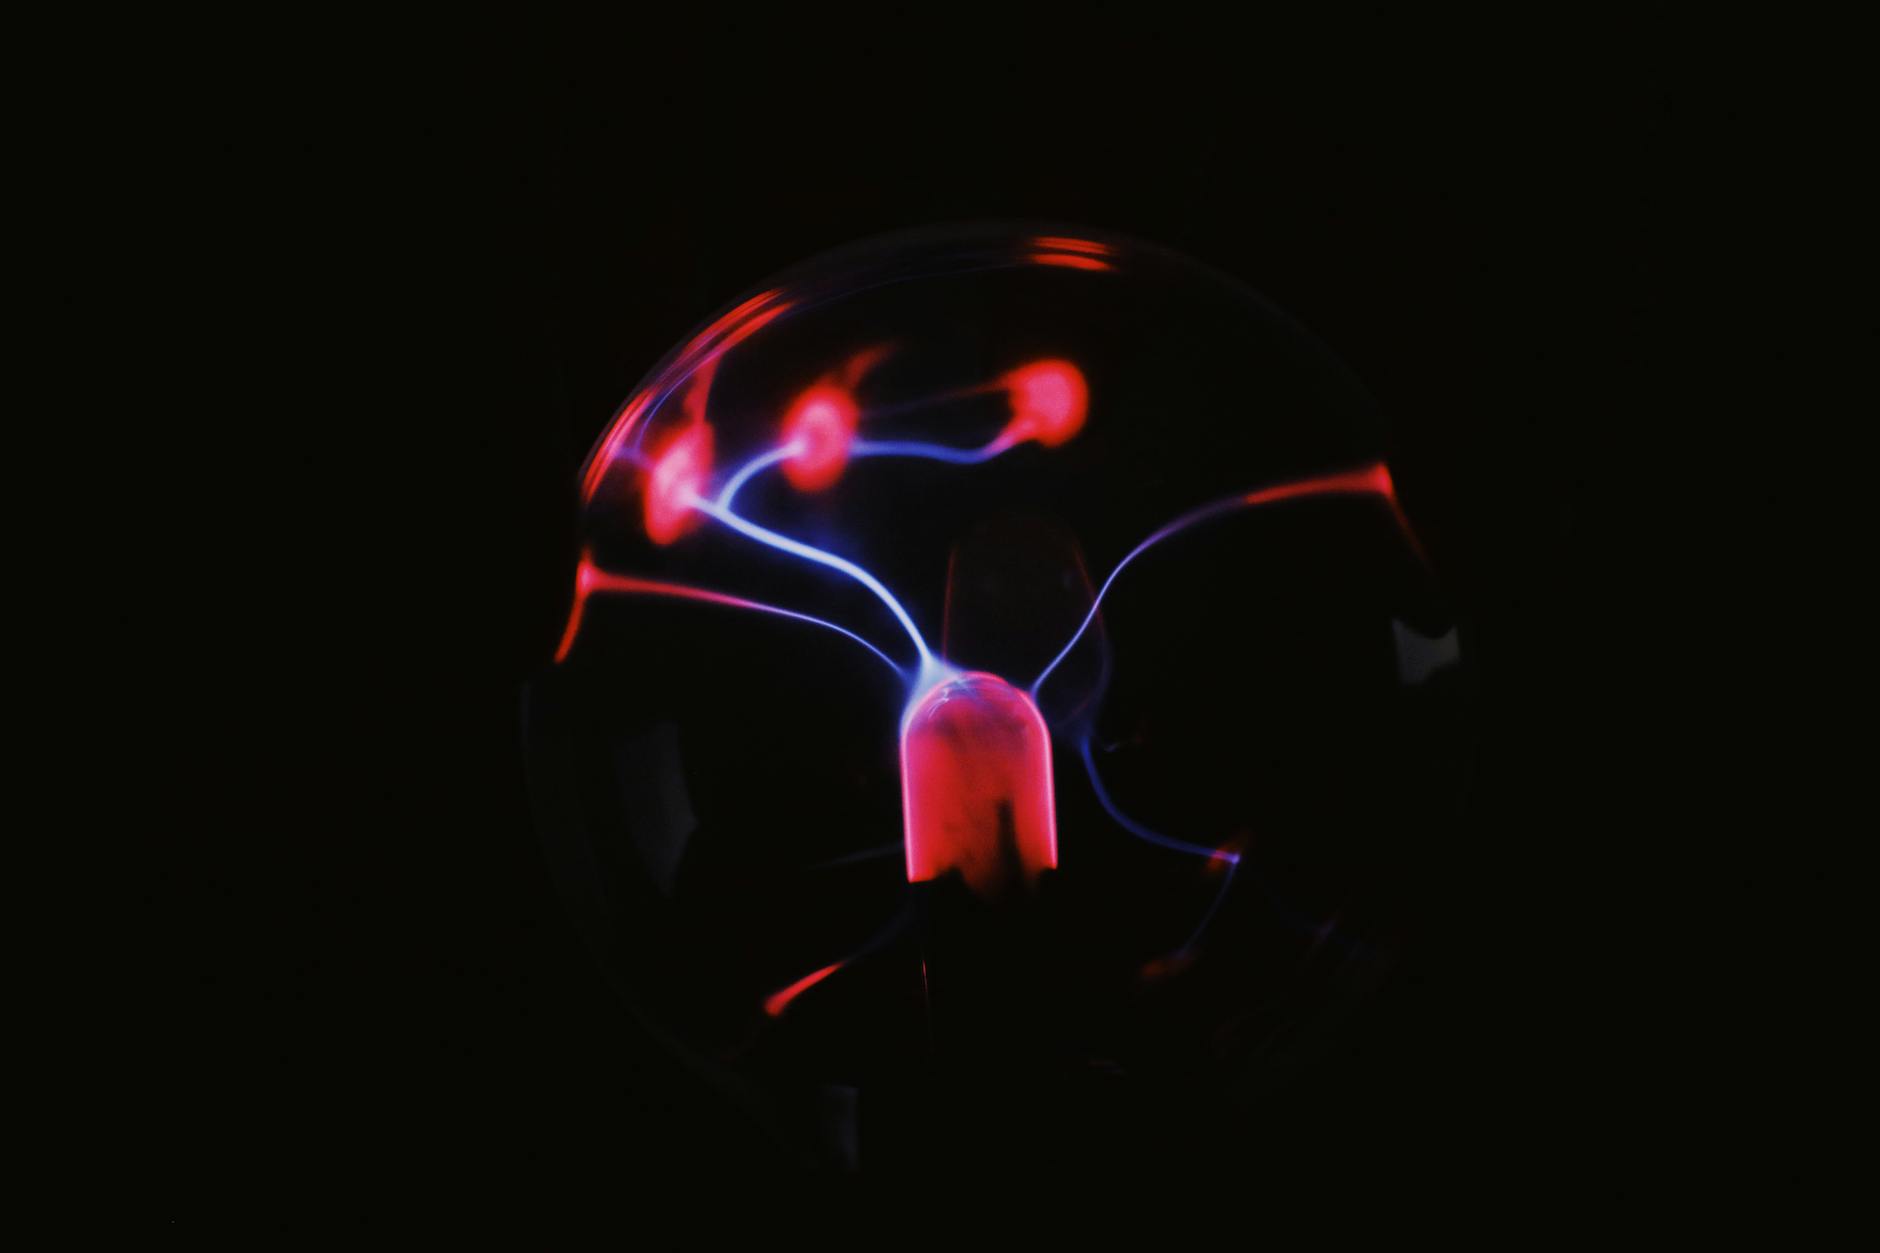 Bright plasma ball with red lights in darkness